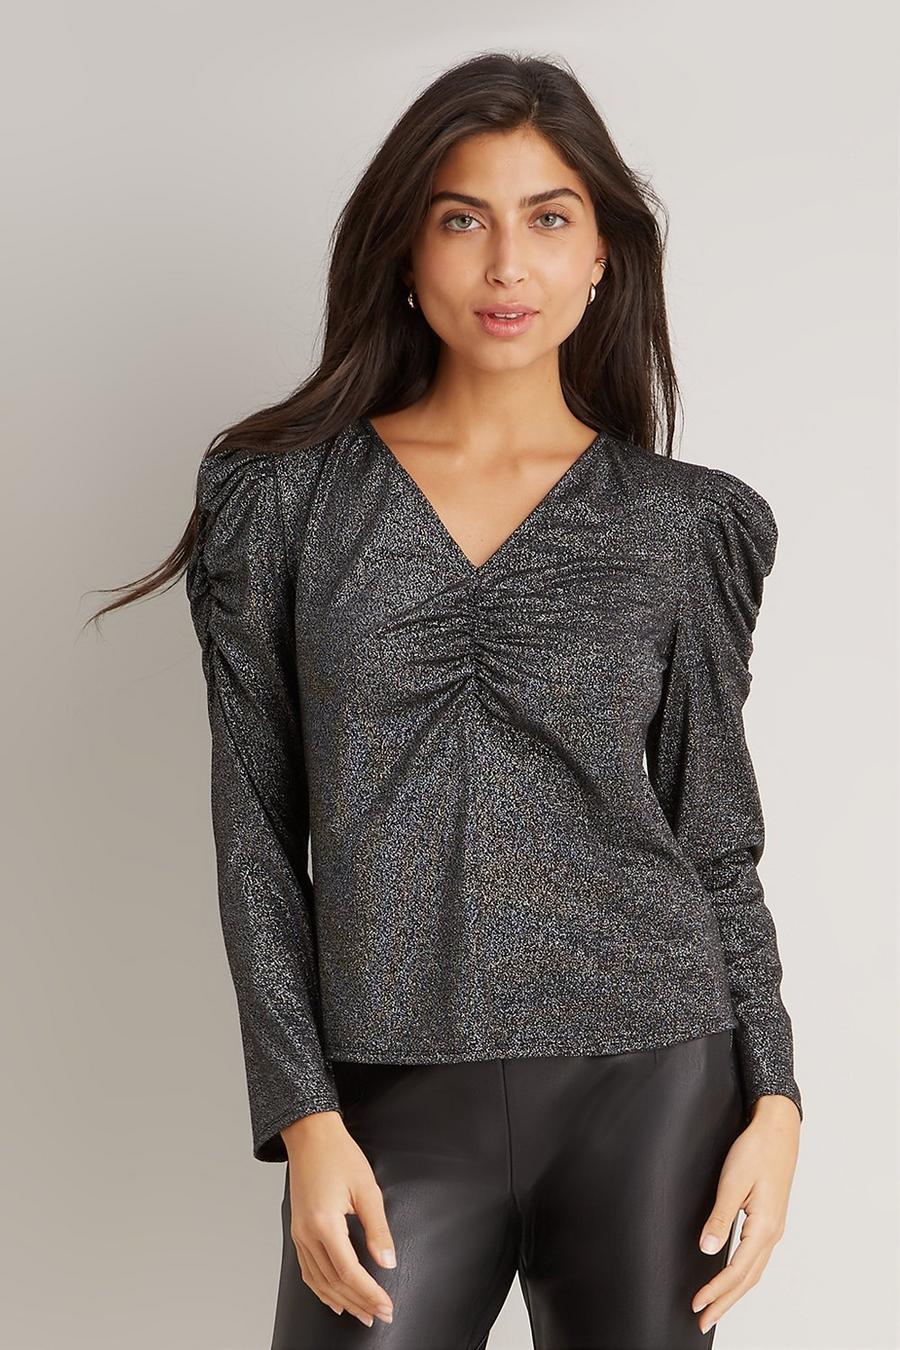 Black Sparkly Ruched Sleeve Top